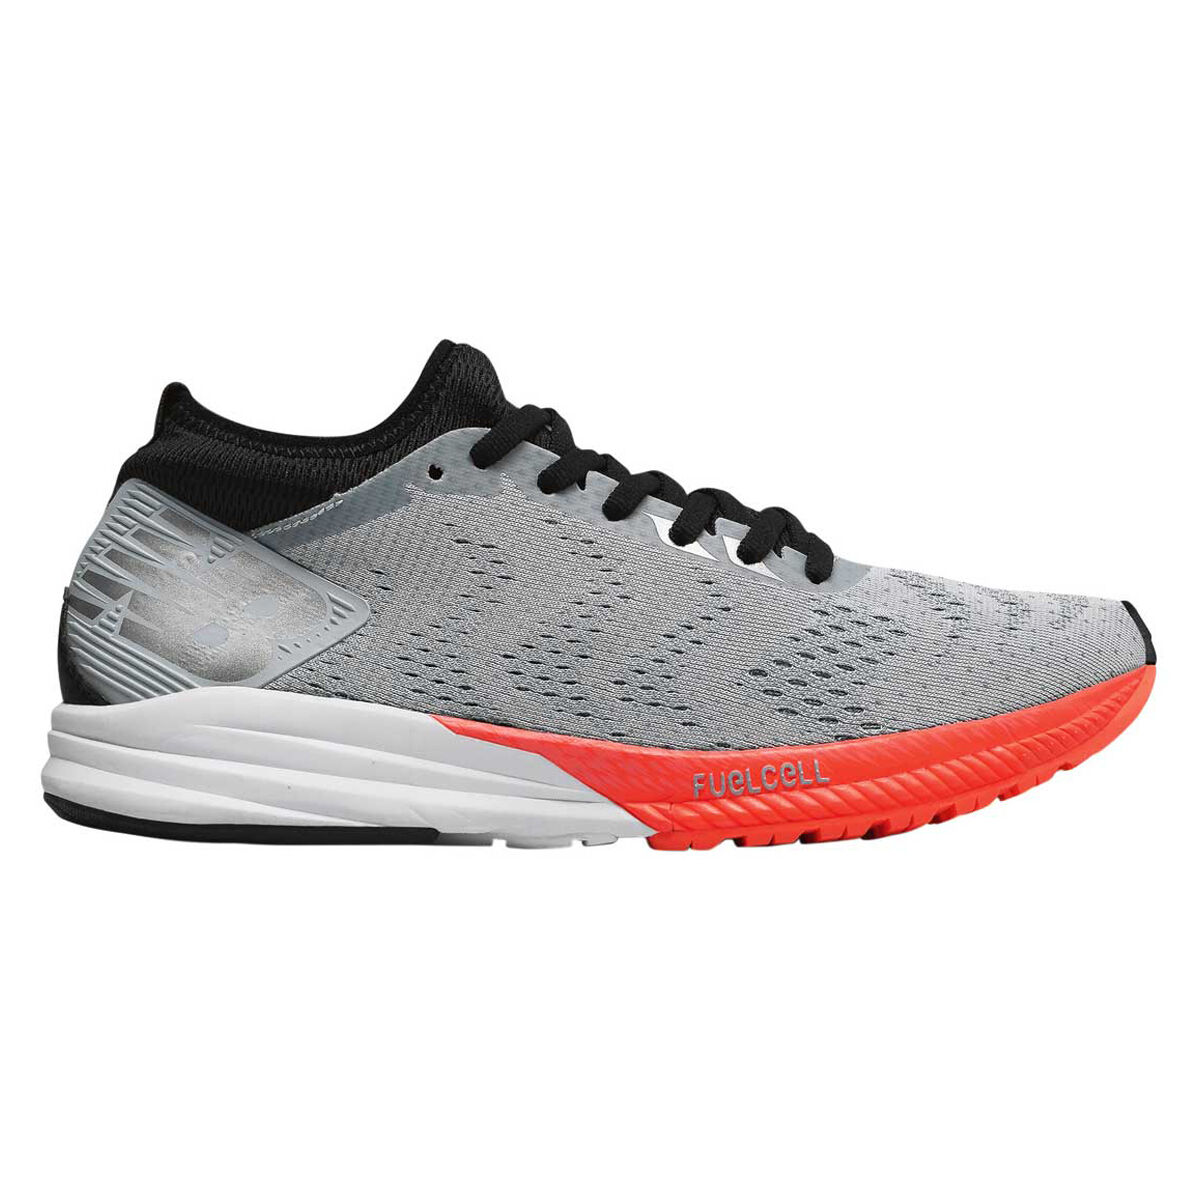 New Balance FuelCell Impulse Womens 